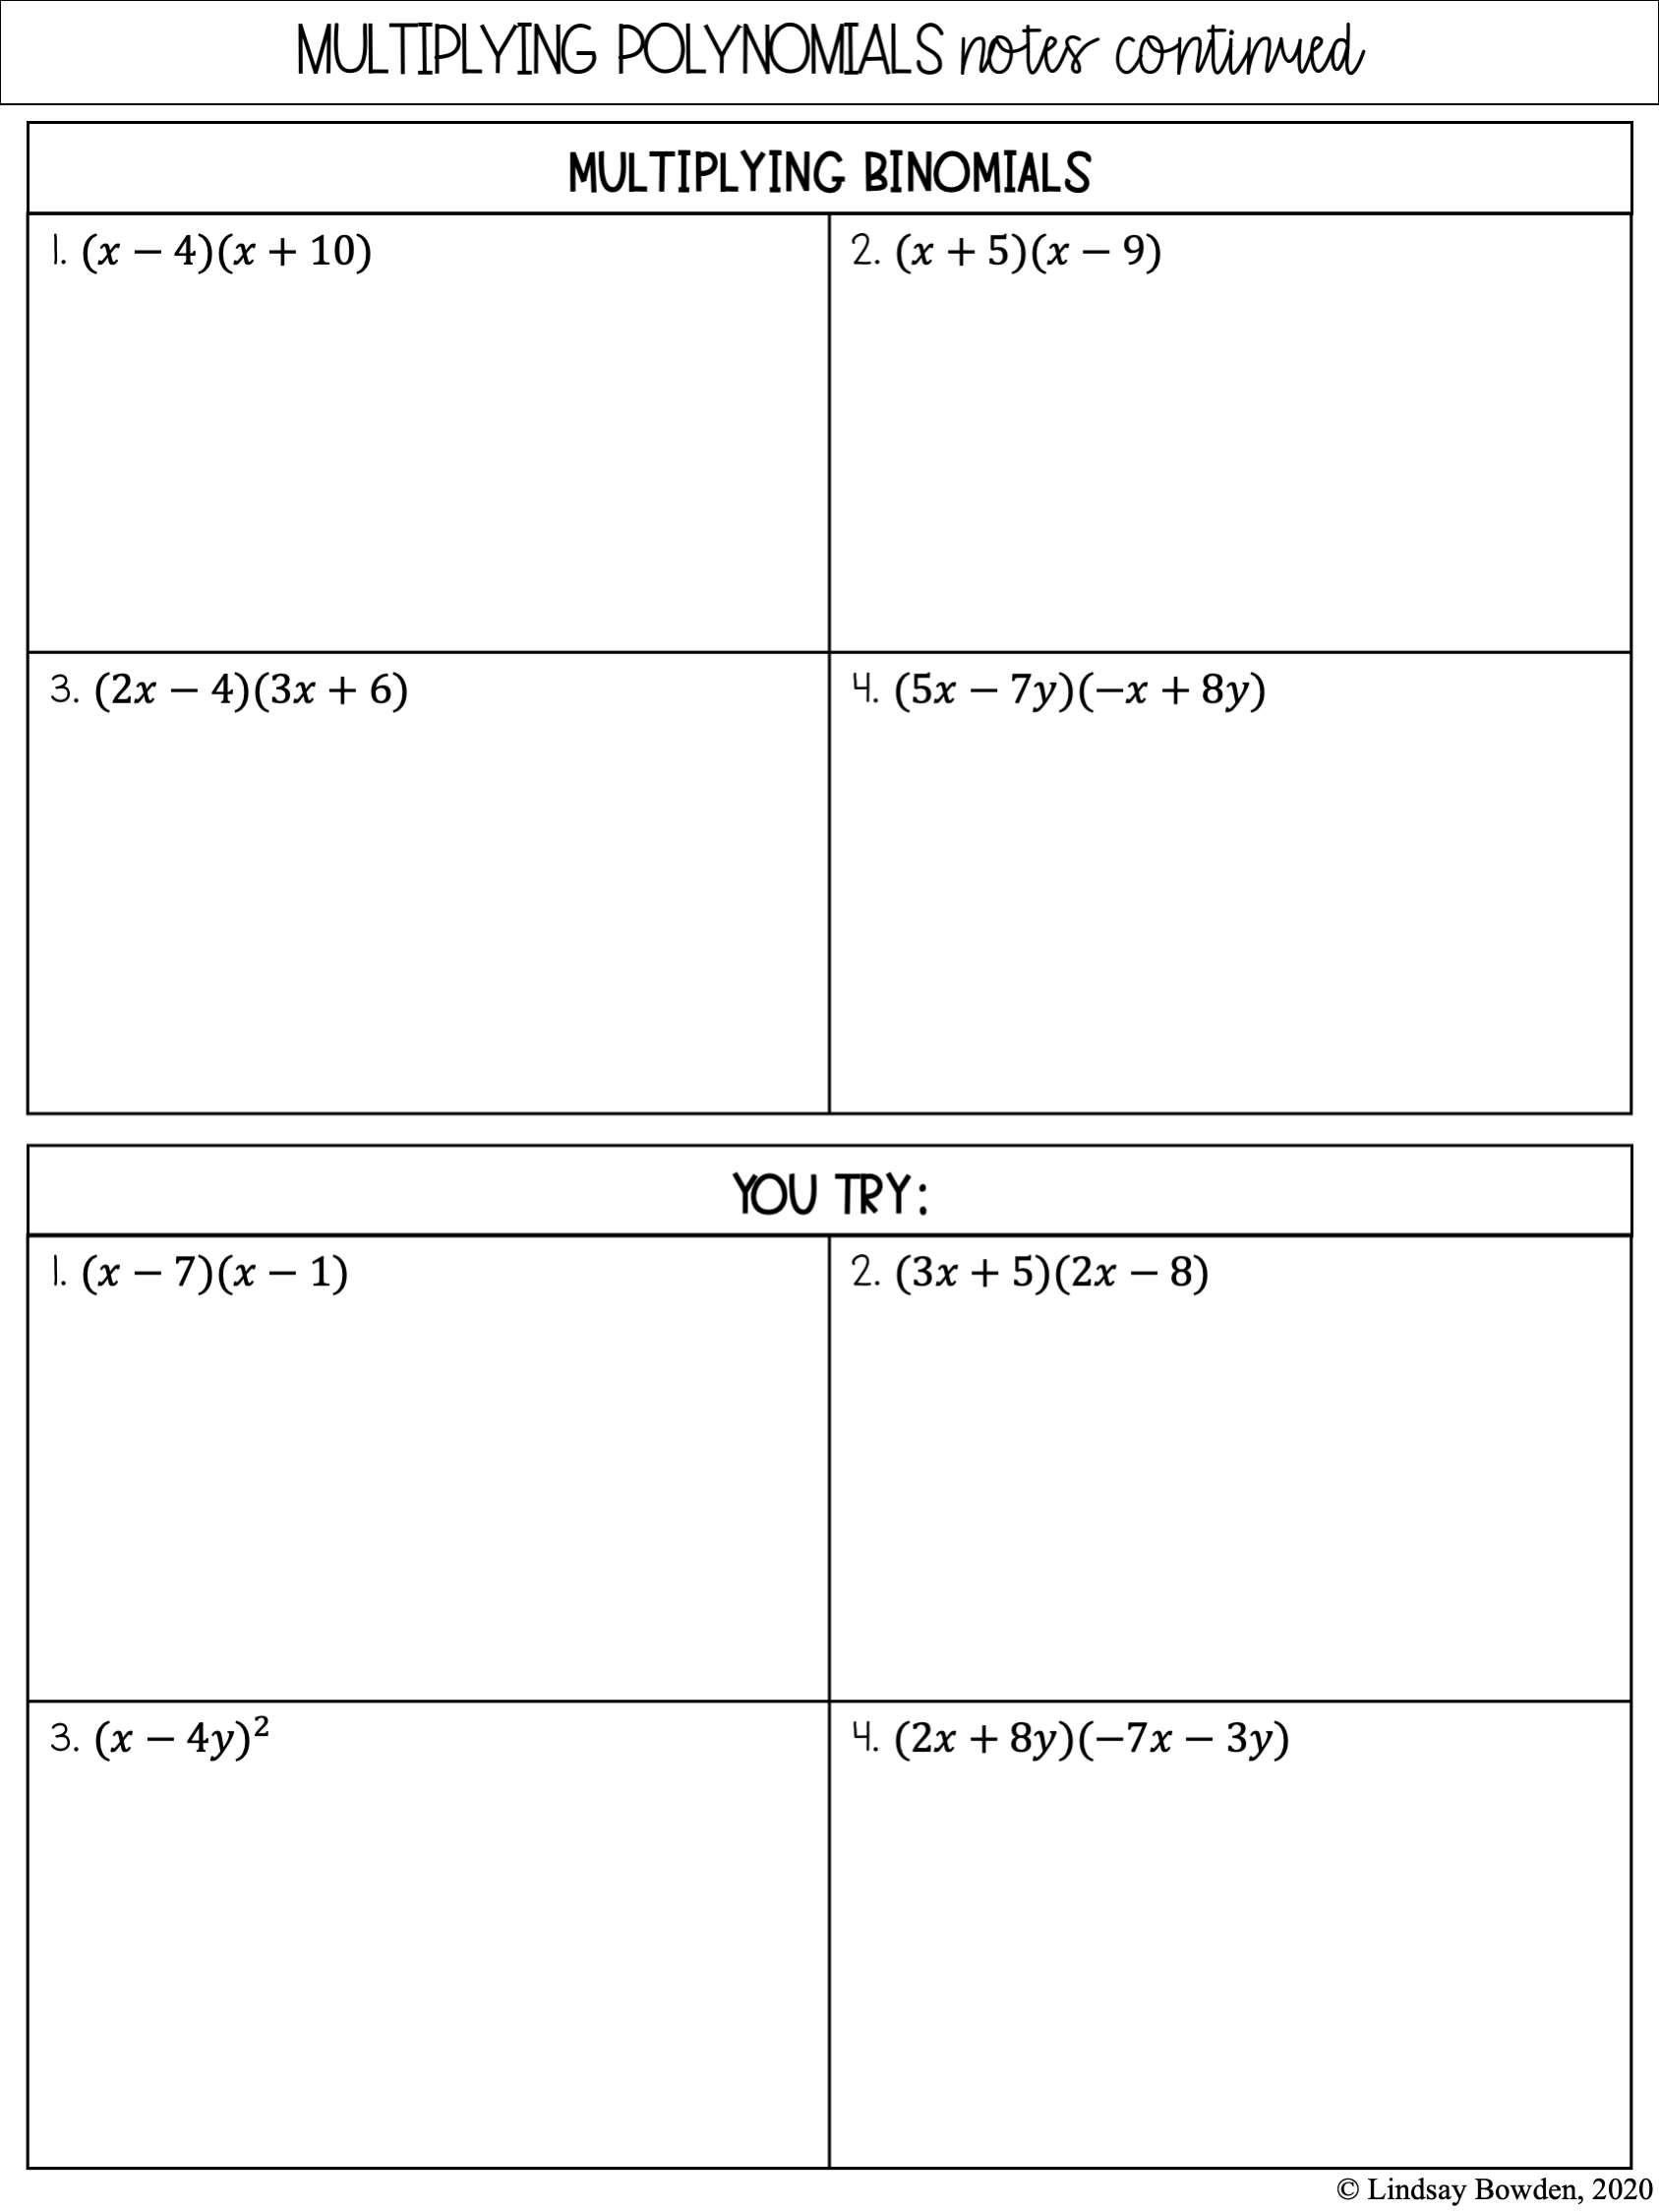 Multiplying Polynomials Notes and Worksheets - Lindsay Bowden With Operations With Polynomials Worksheet